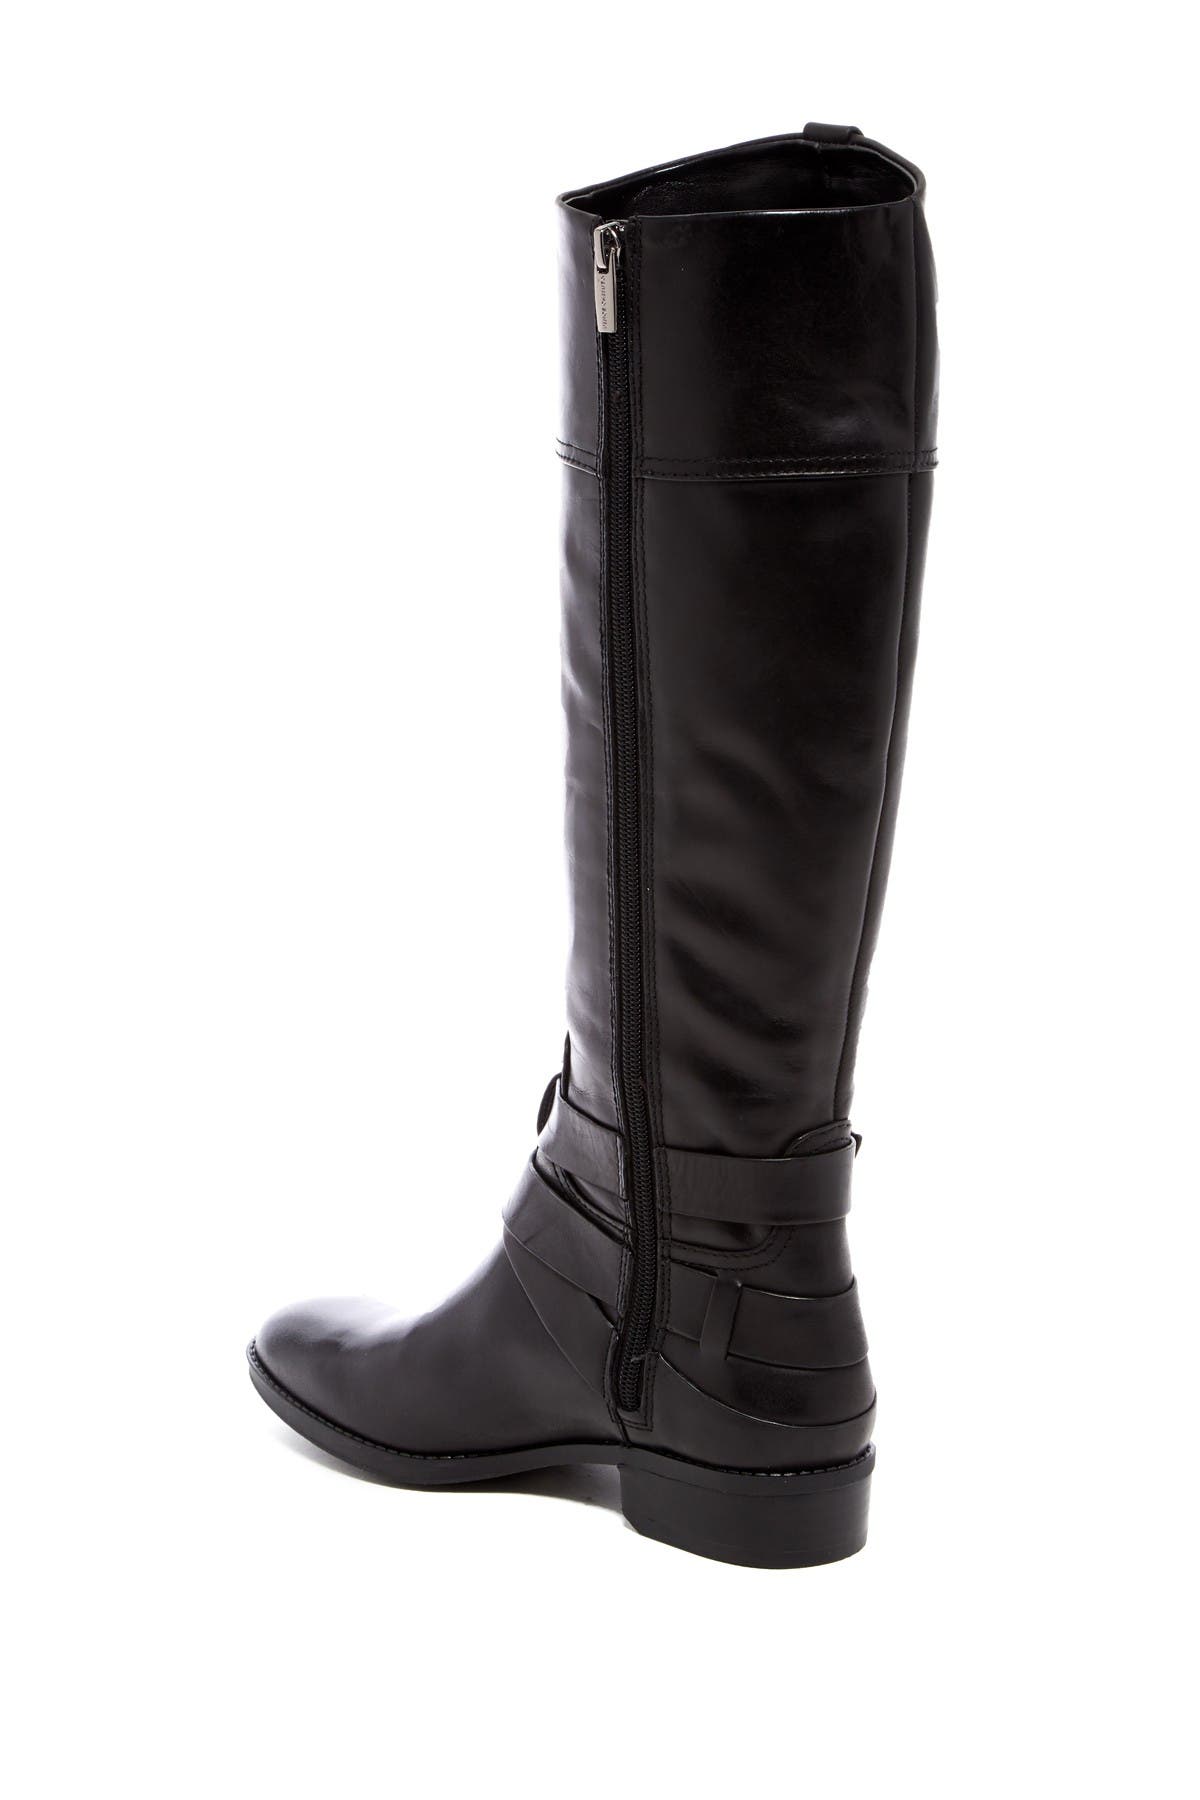 Vince Camuto | Pazell Tall Boot | Nordstrom Rack